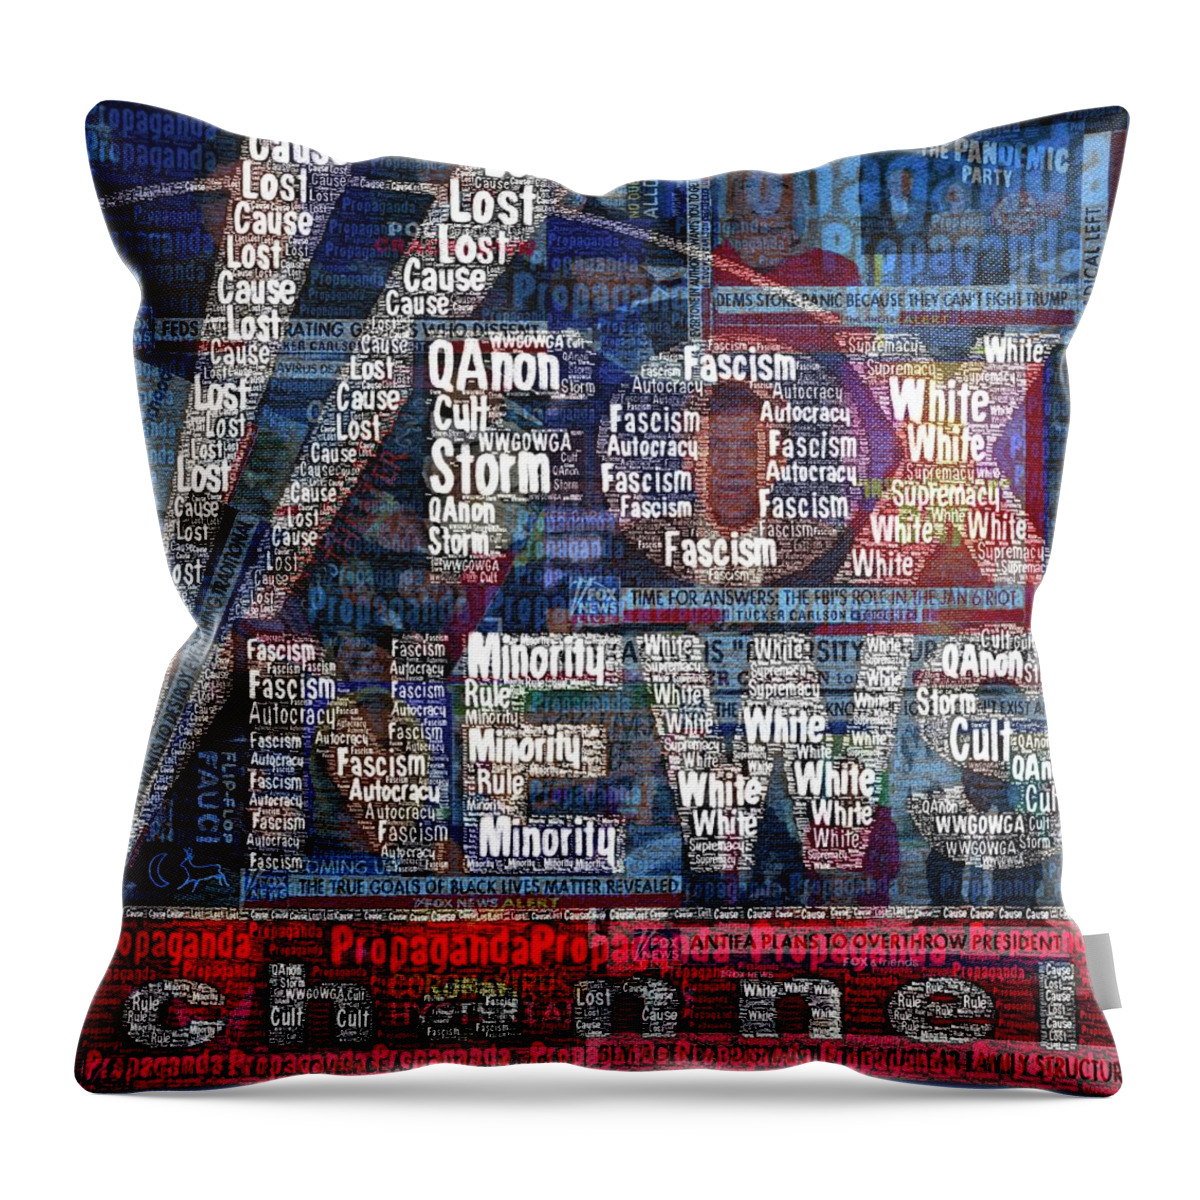  Throw Pillow featuring the digital art That's Entertainment by Jason Cardwell